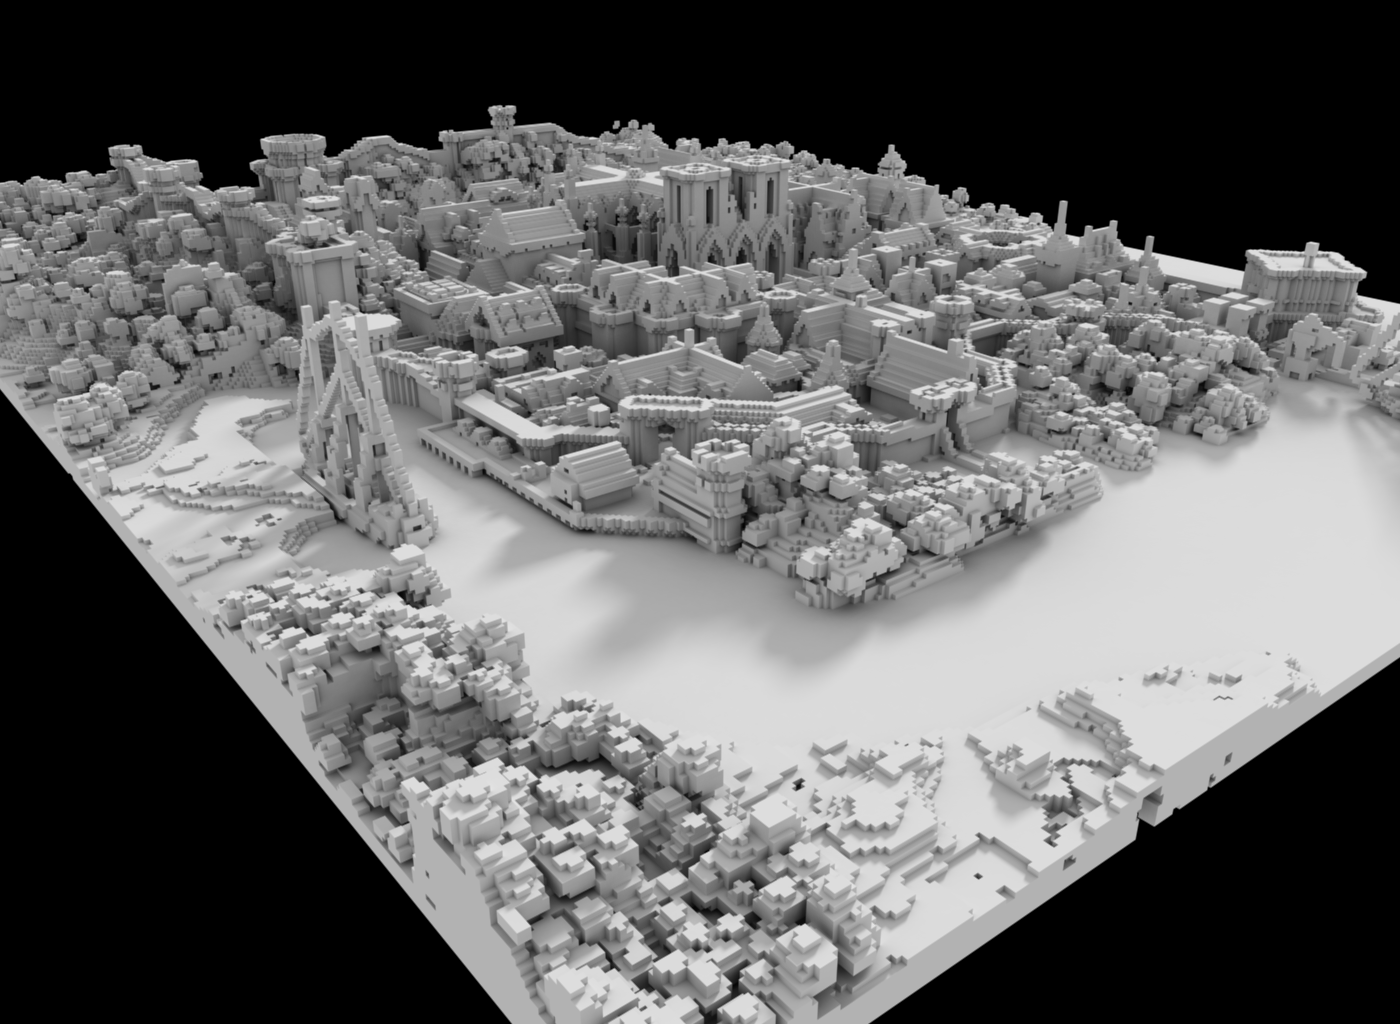 voor mij Zwart is genoeg ephtracy on Twitter: "voxelized the mesh converted from minecraft map  "Rungholt" : http://t.co/uRzdzpQ32O http://t.co/KsG2tdOgJP" / Twitter